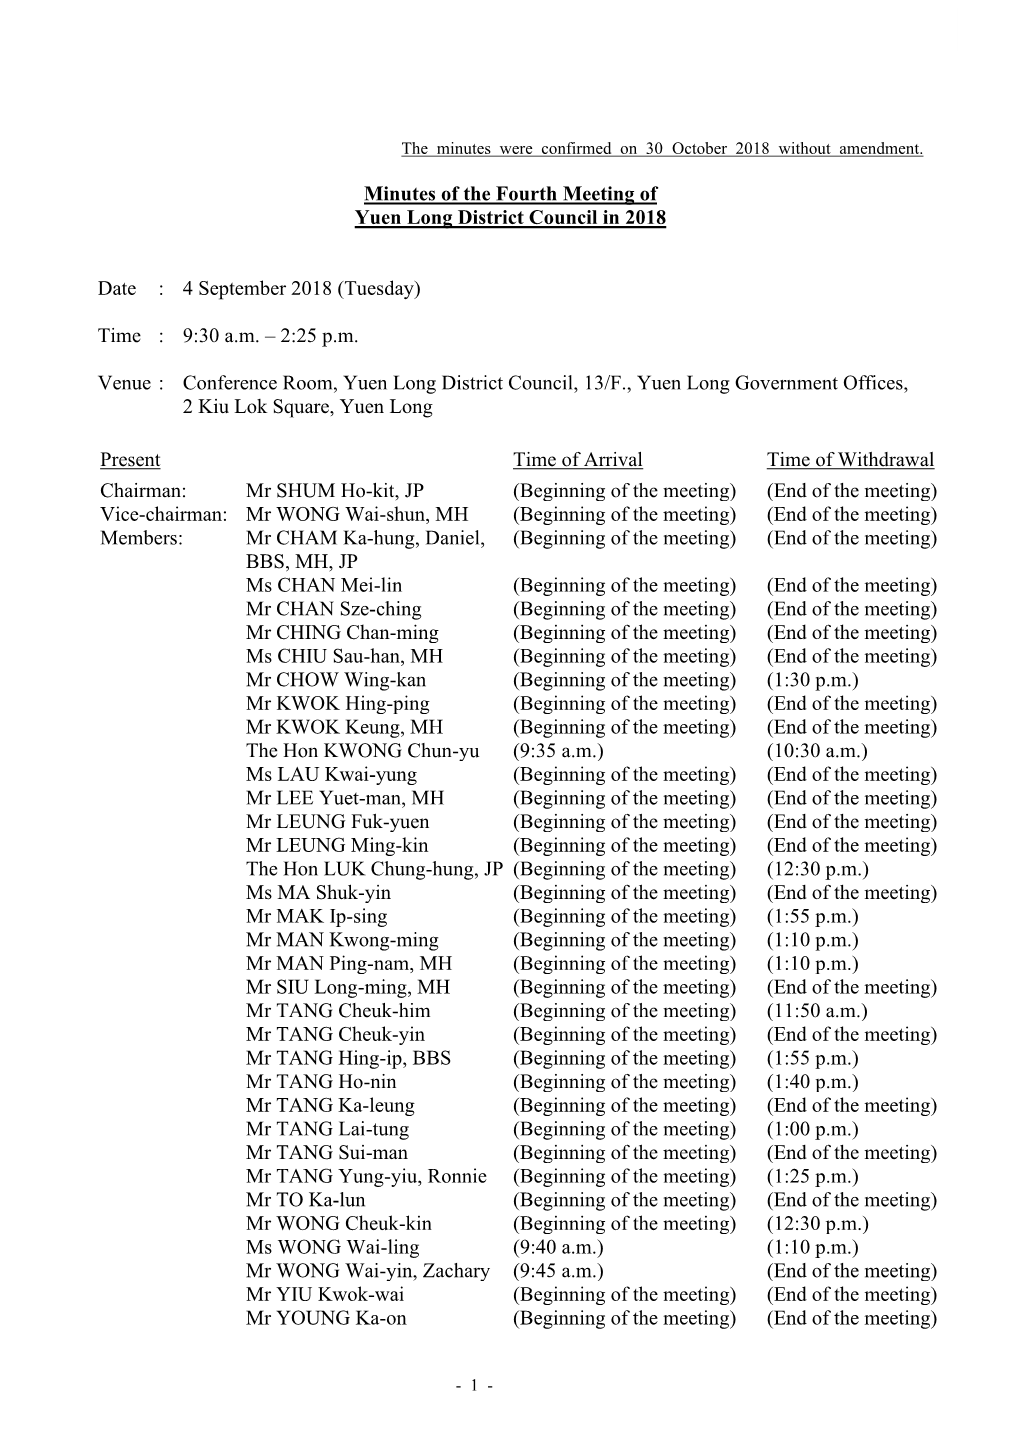 Minutes of the Fourth Meeting of Yuen Long District Council in 2018 Date